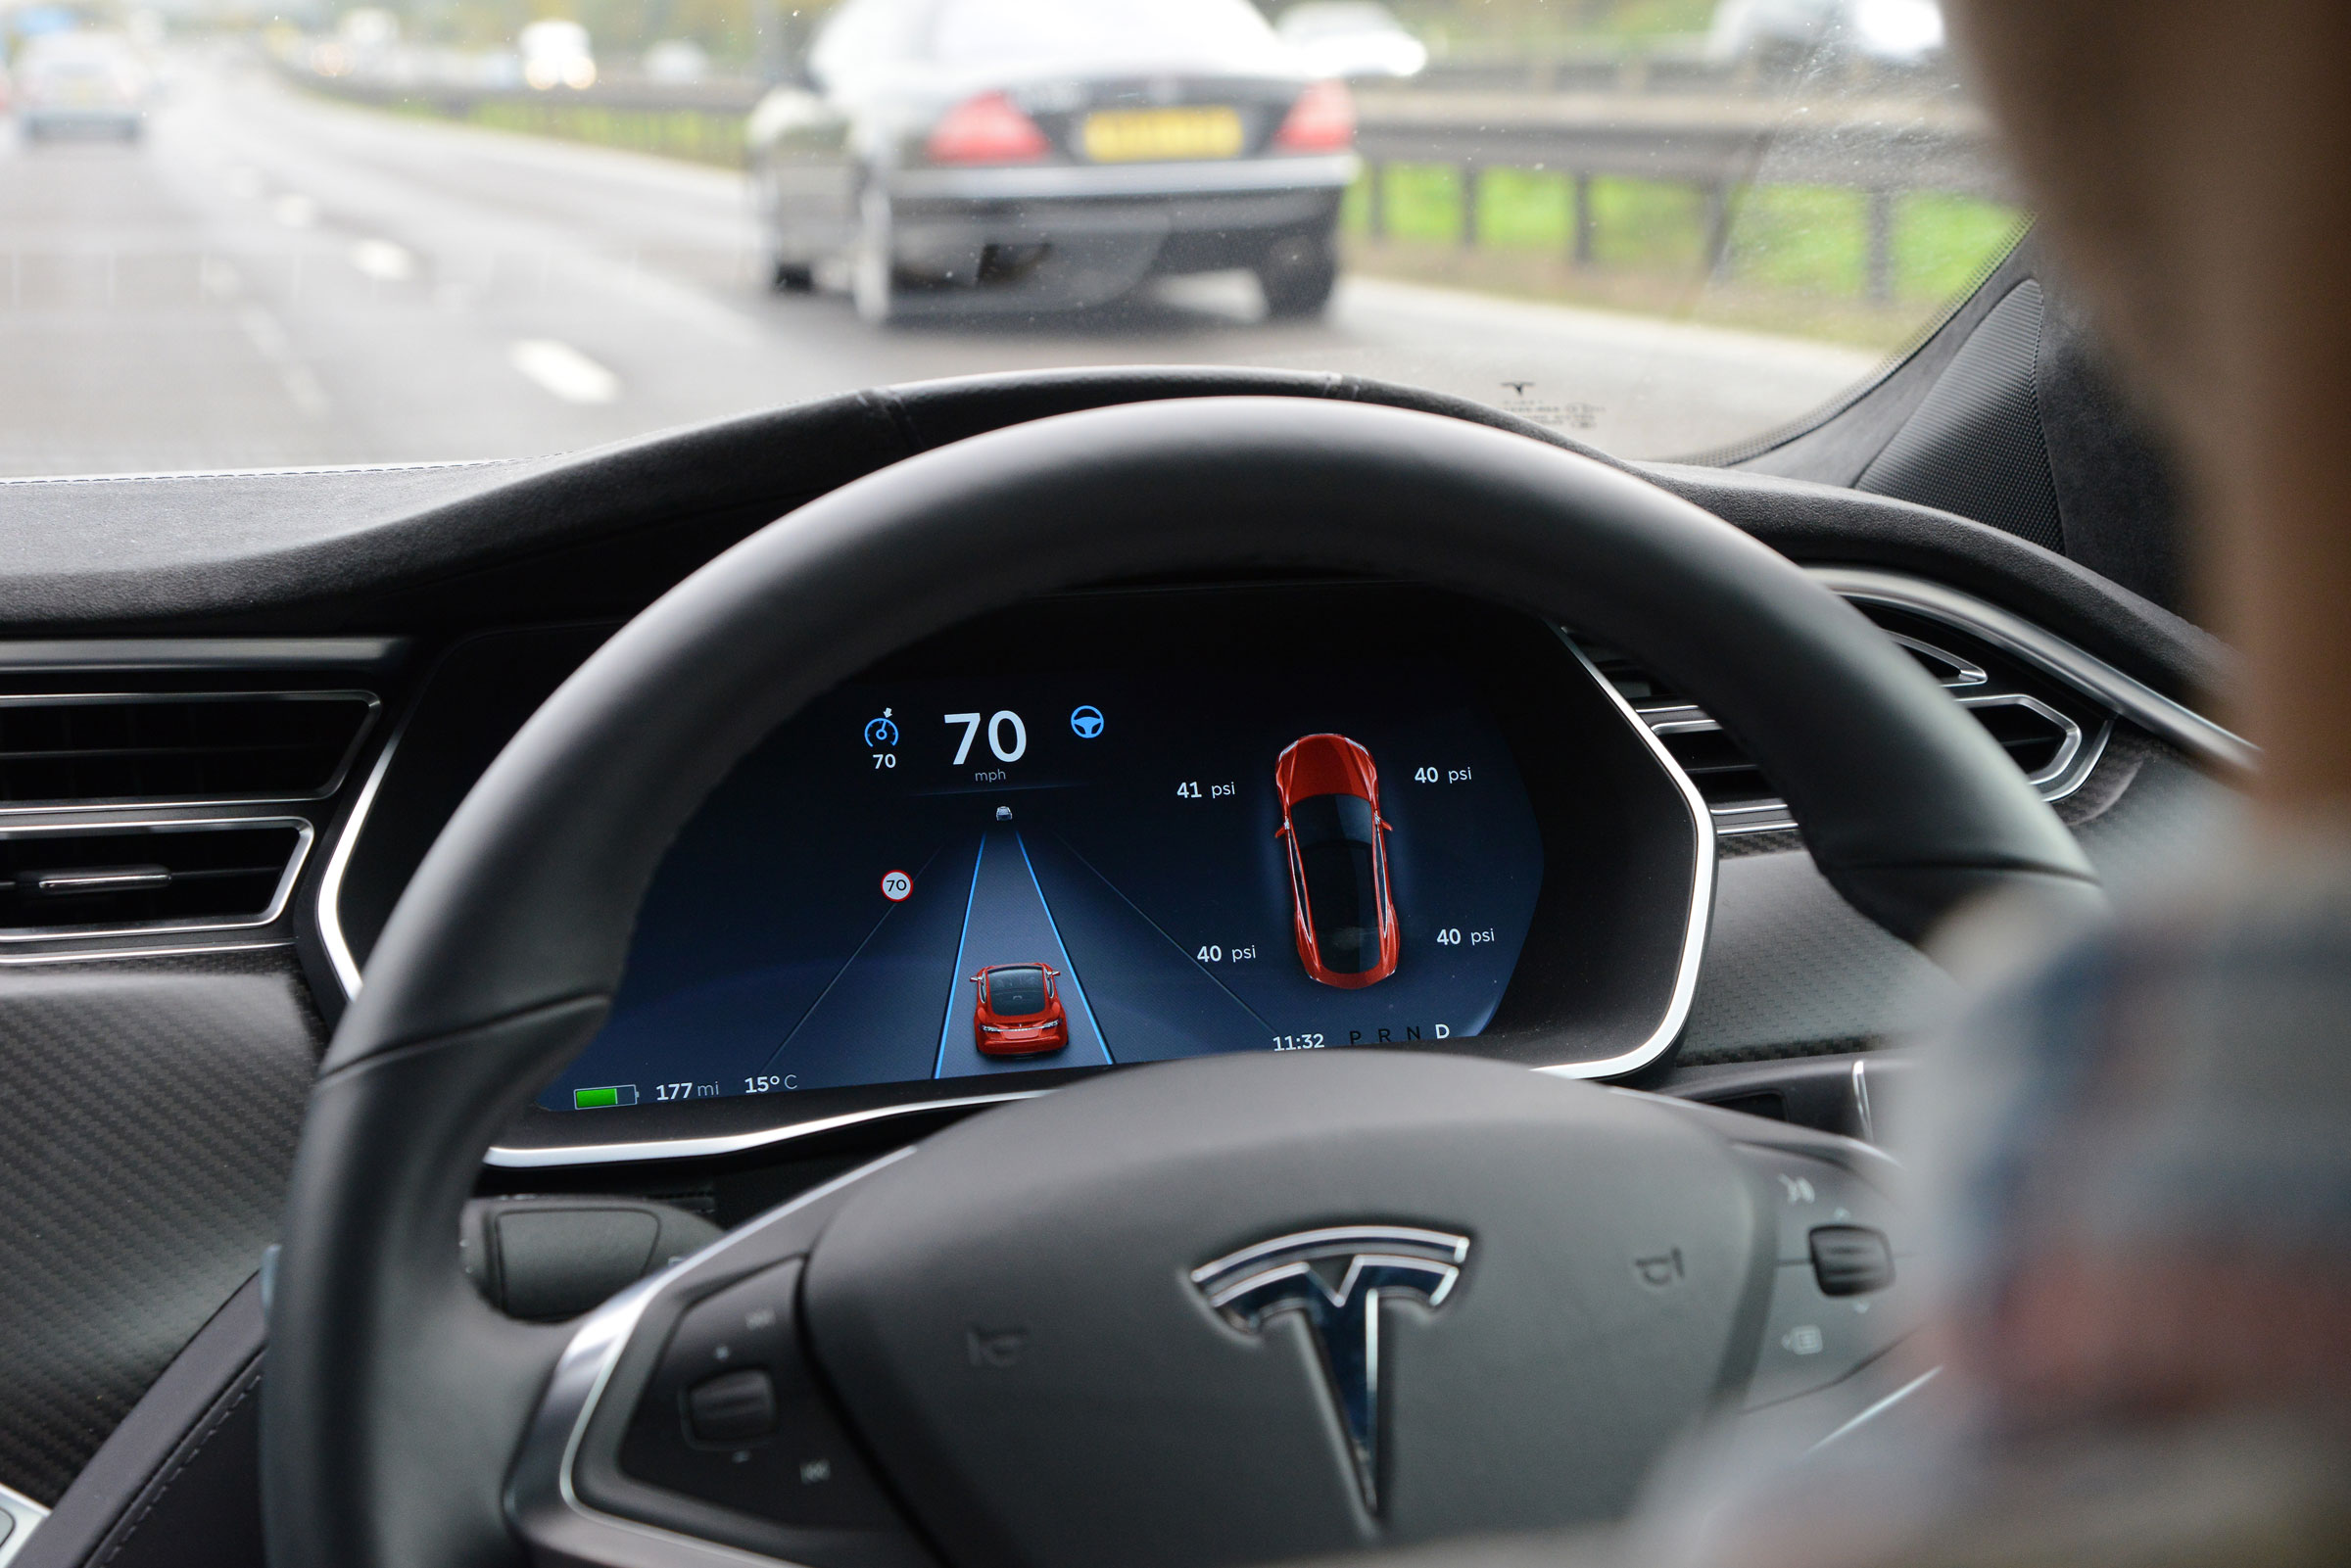 First Tesla Enhanced Autopilot features due in 'about three weeks